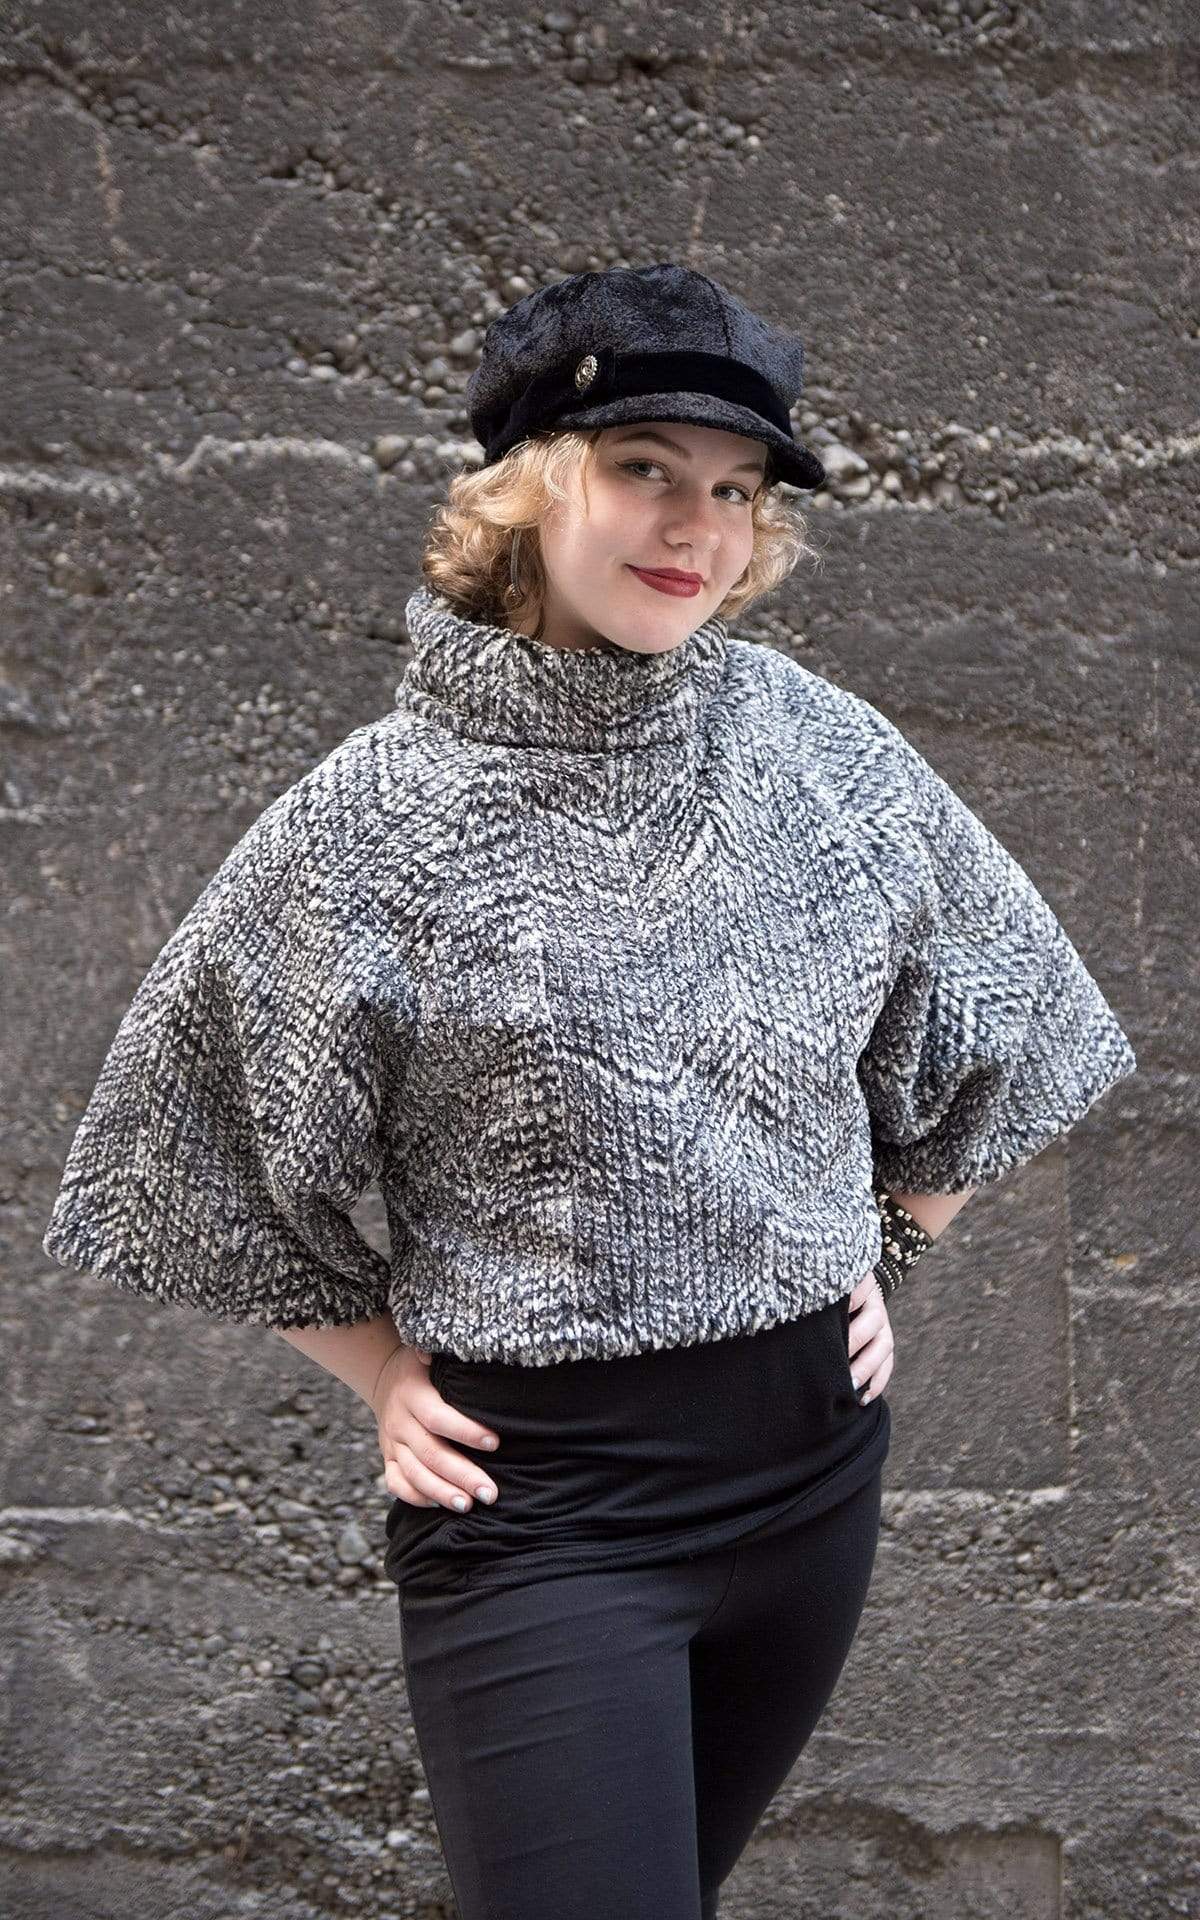 Model posing in Sweater Top | Cozy Cable Black and White Faux Fur | Handmade By Pandemonium Millinery | Seattle WA USA